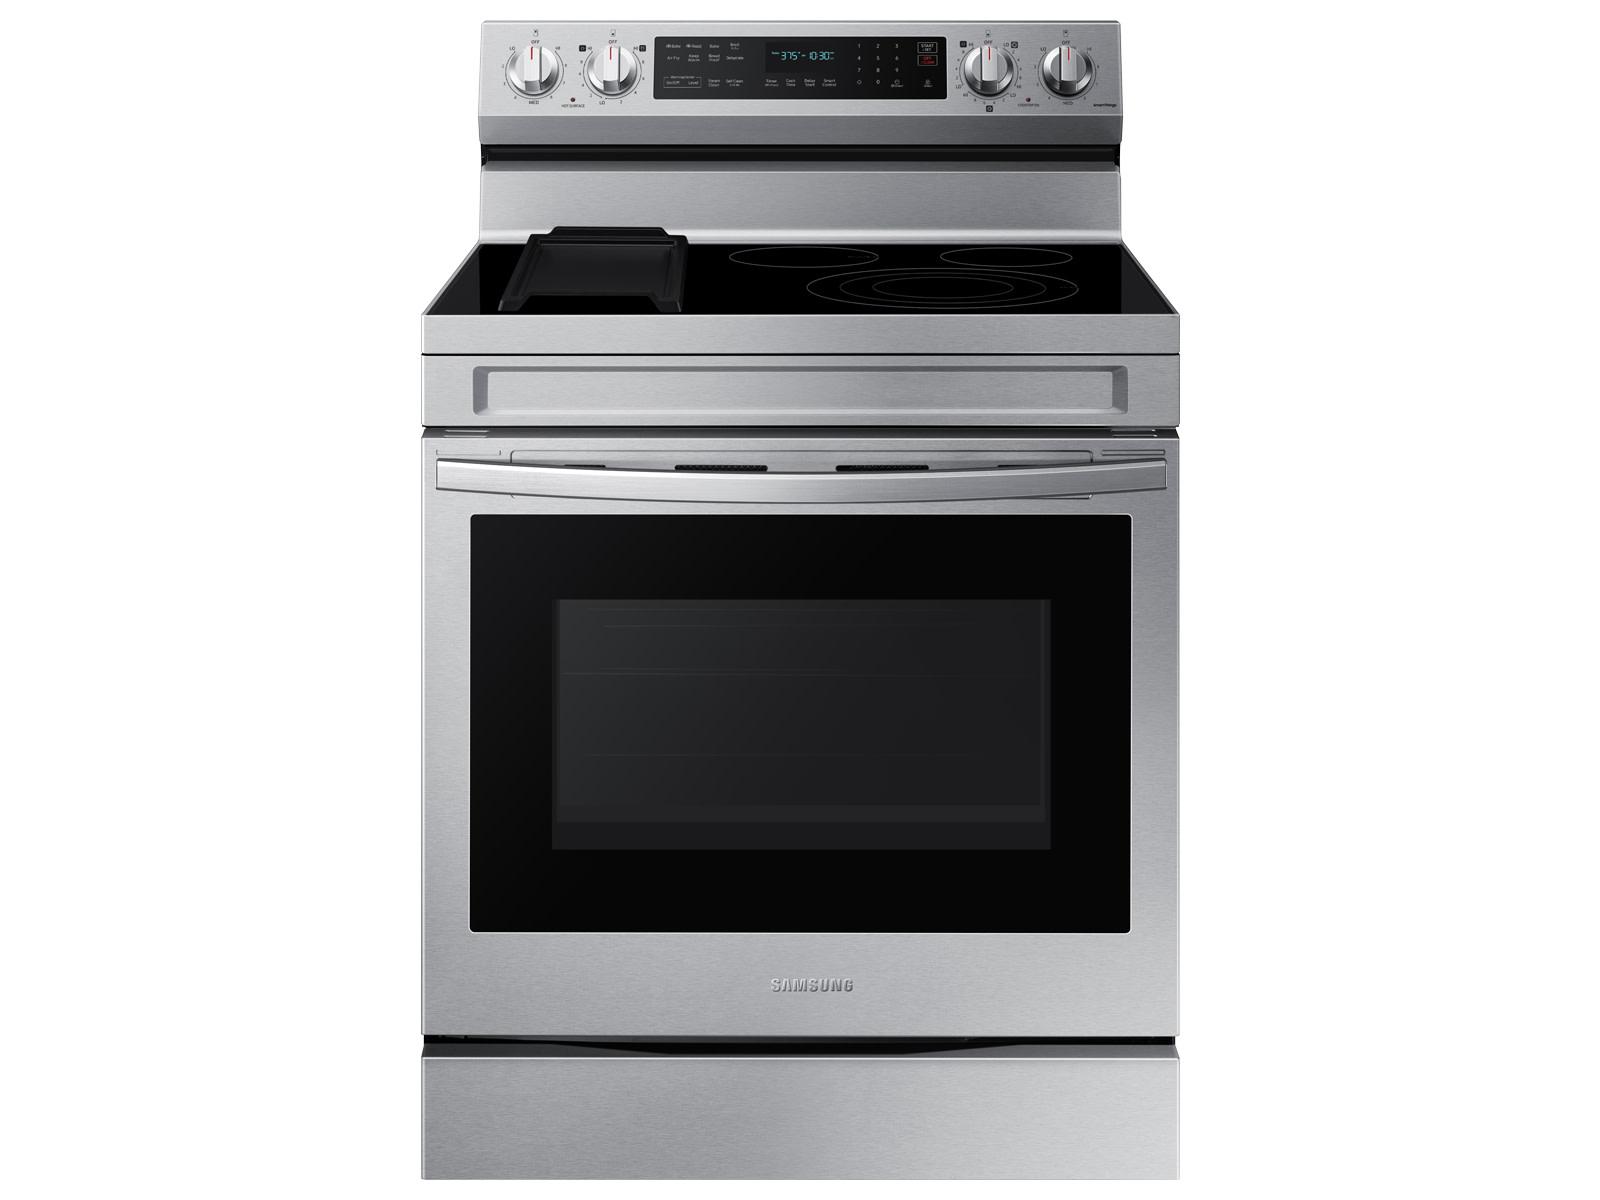 Samsung NE63A6711SS/AA Smart Freestanding Electric Range in Stainless Steel